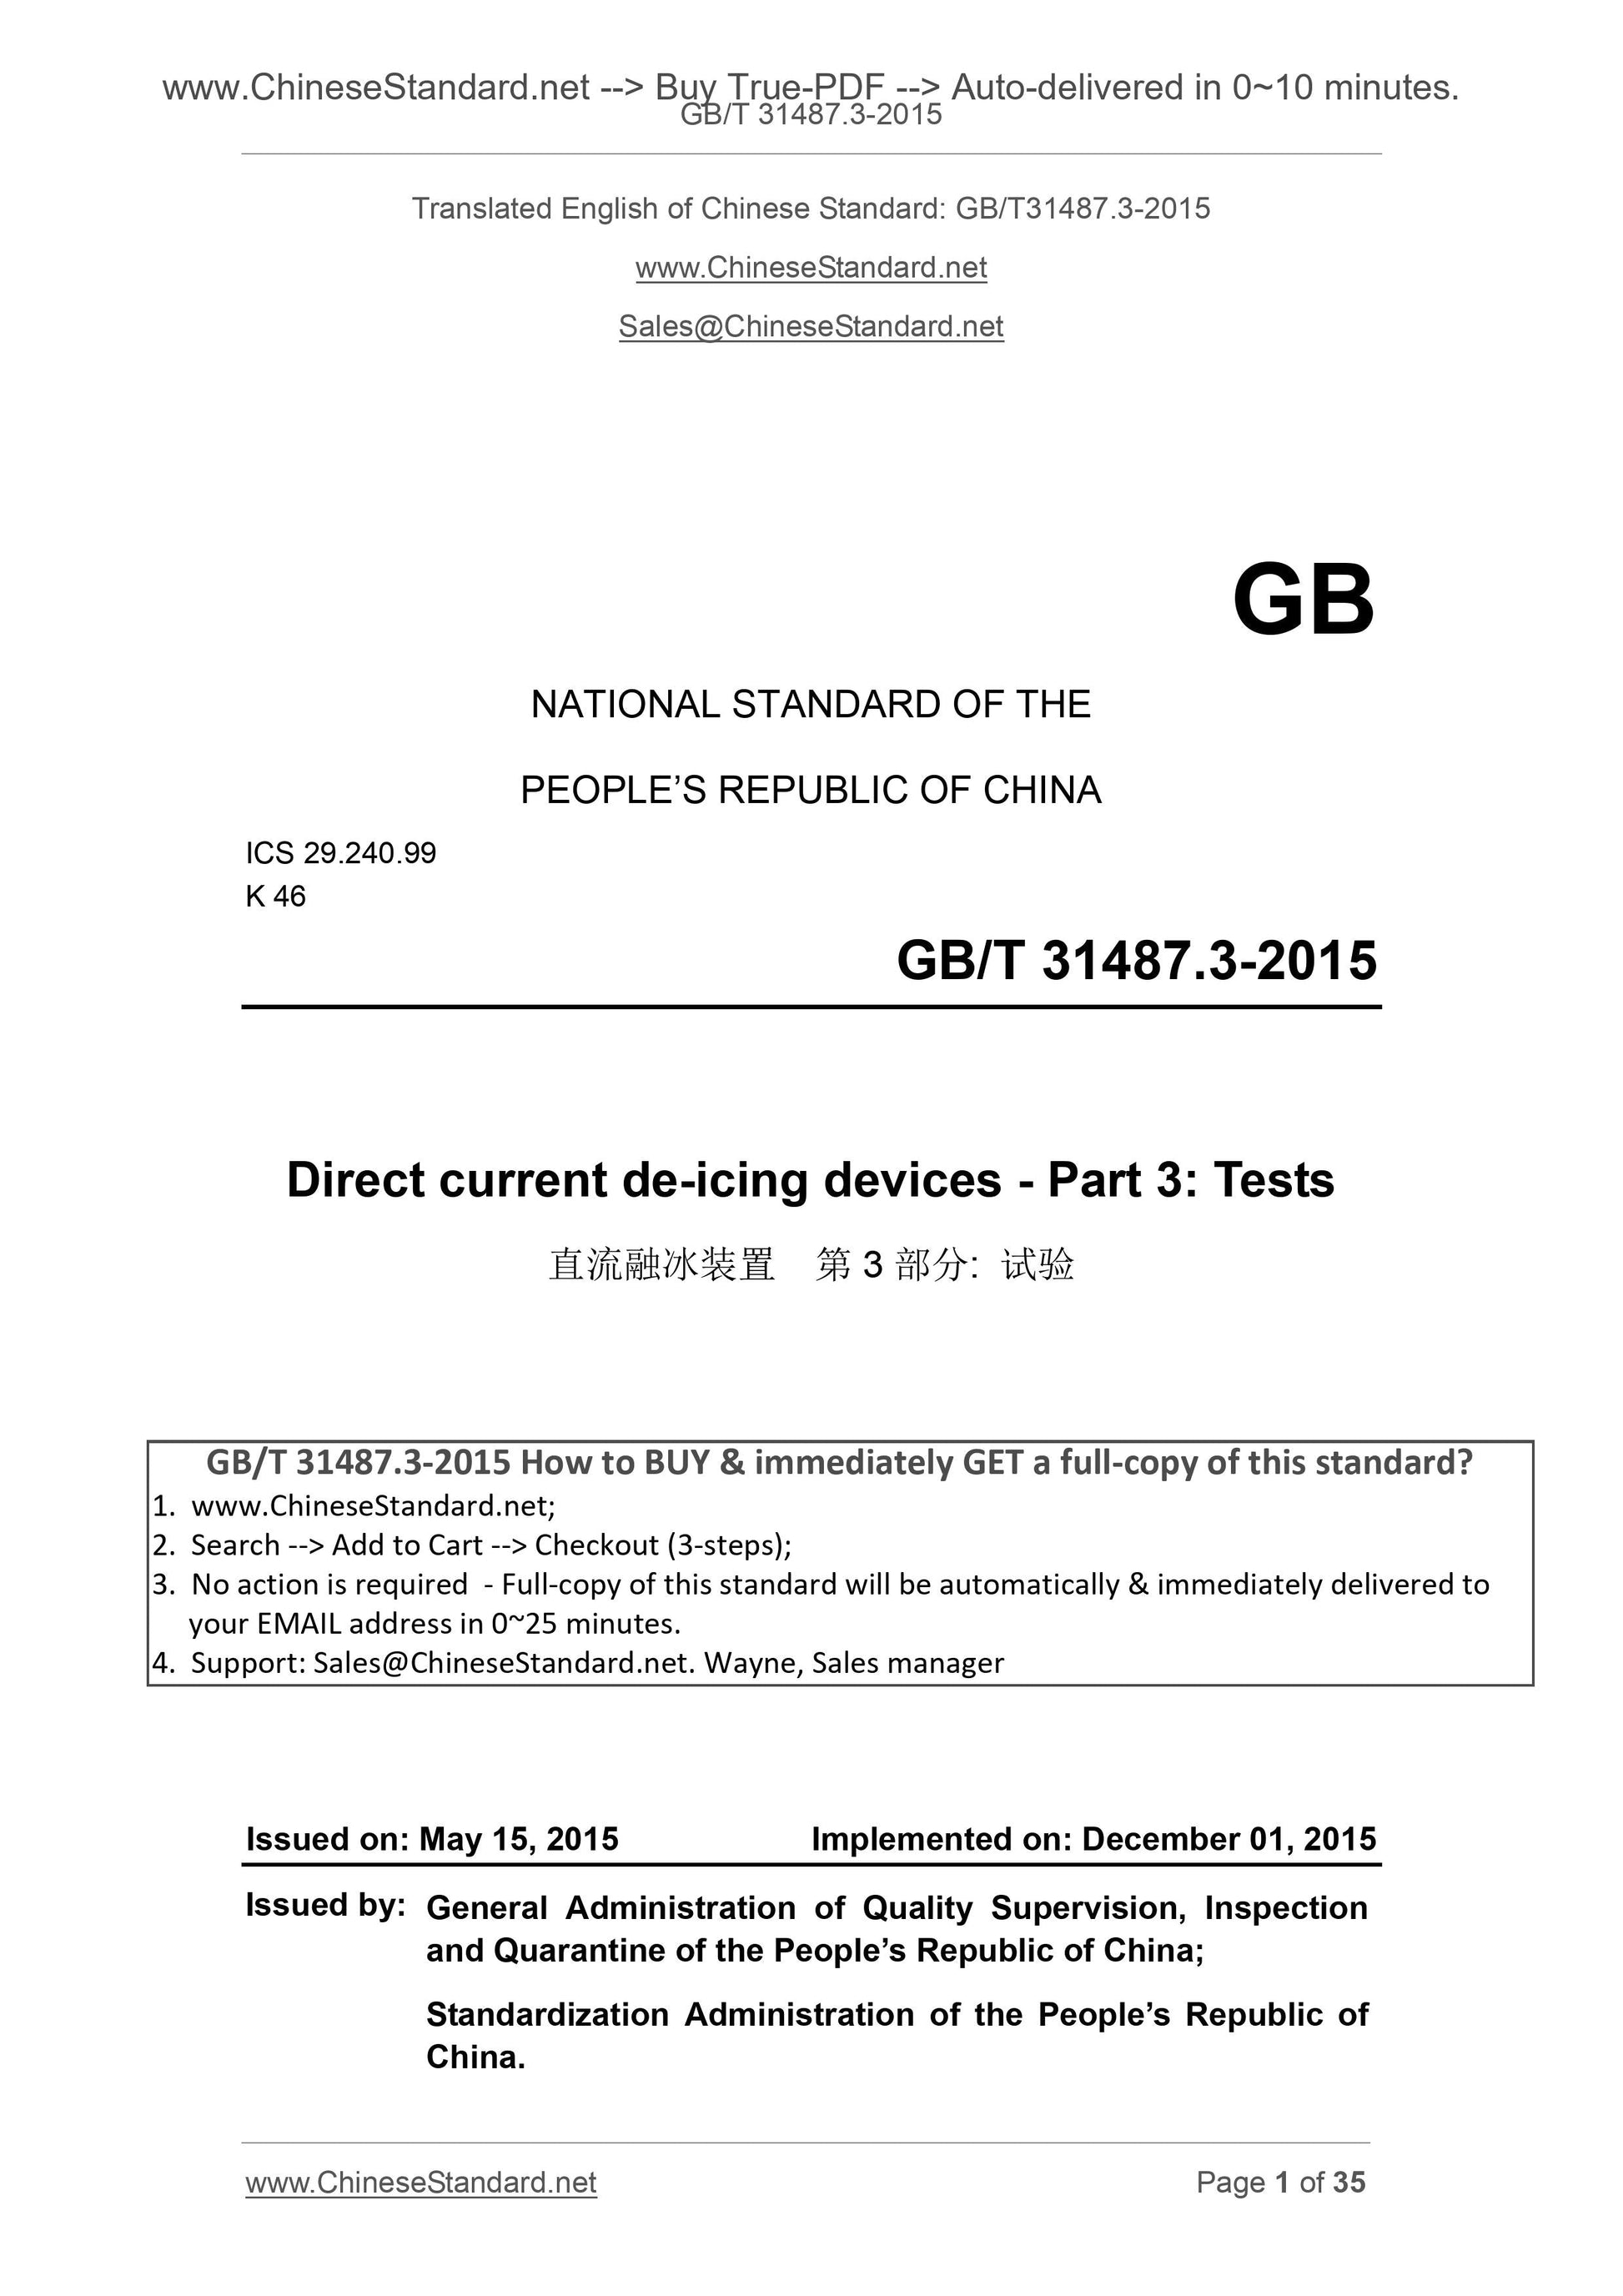 GB/T 31487.3-2015 Page 1